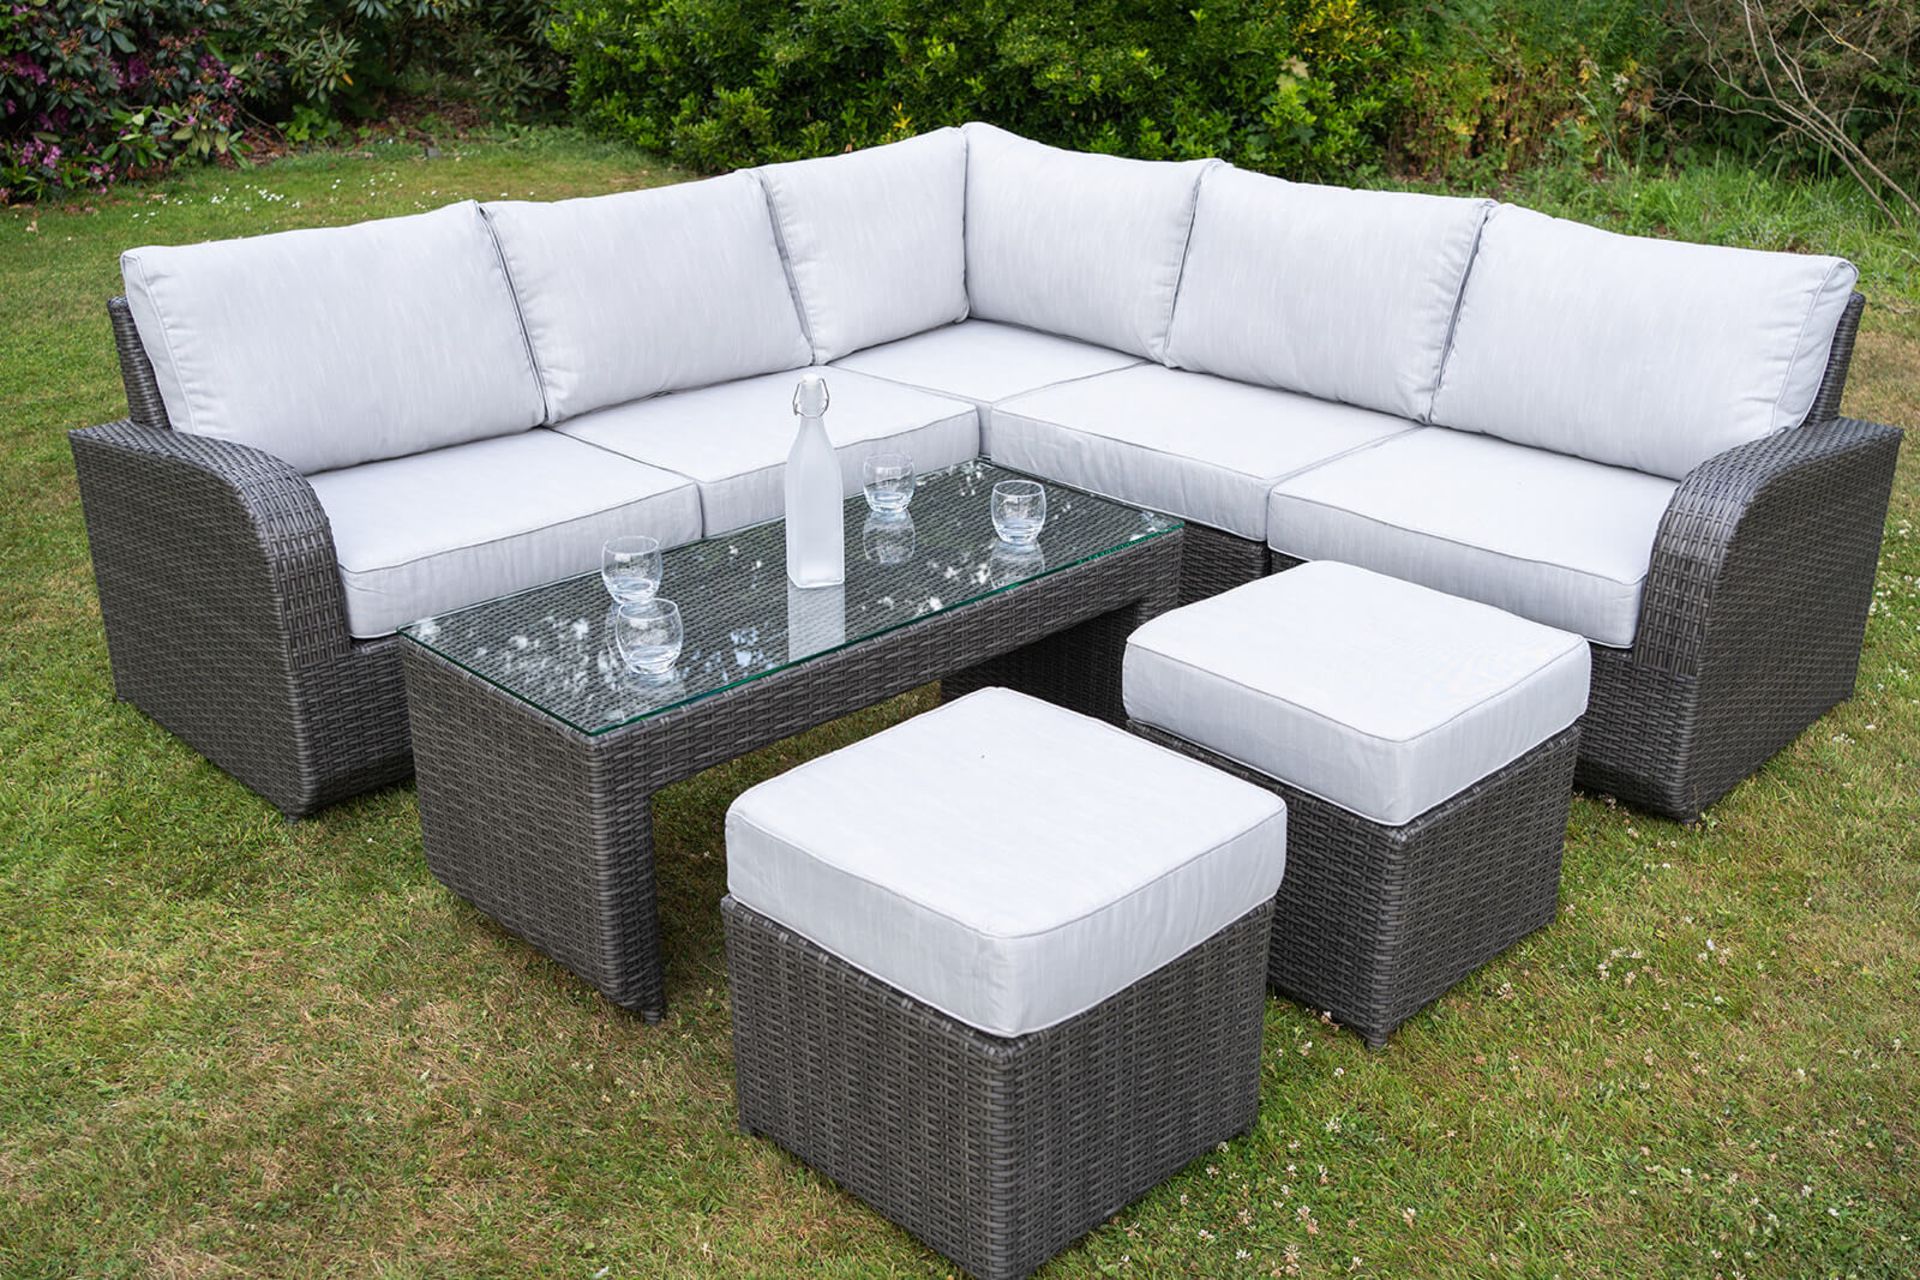 Brand New Moda Furniture 8 Piece Corner Group With Coffee Table in Natural with Cream Cushions. RRP - Image 7 of 11